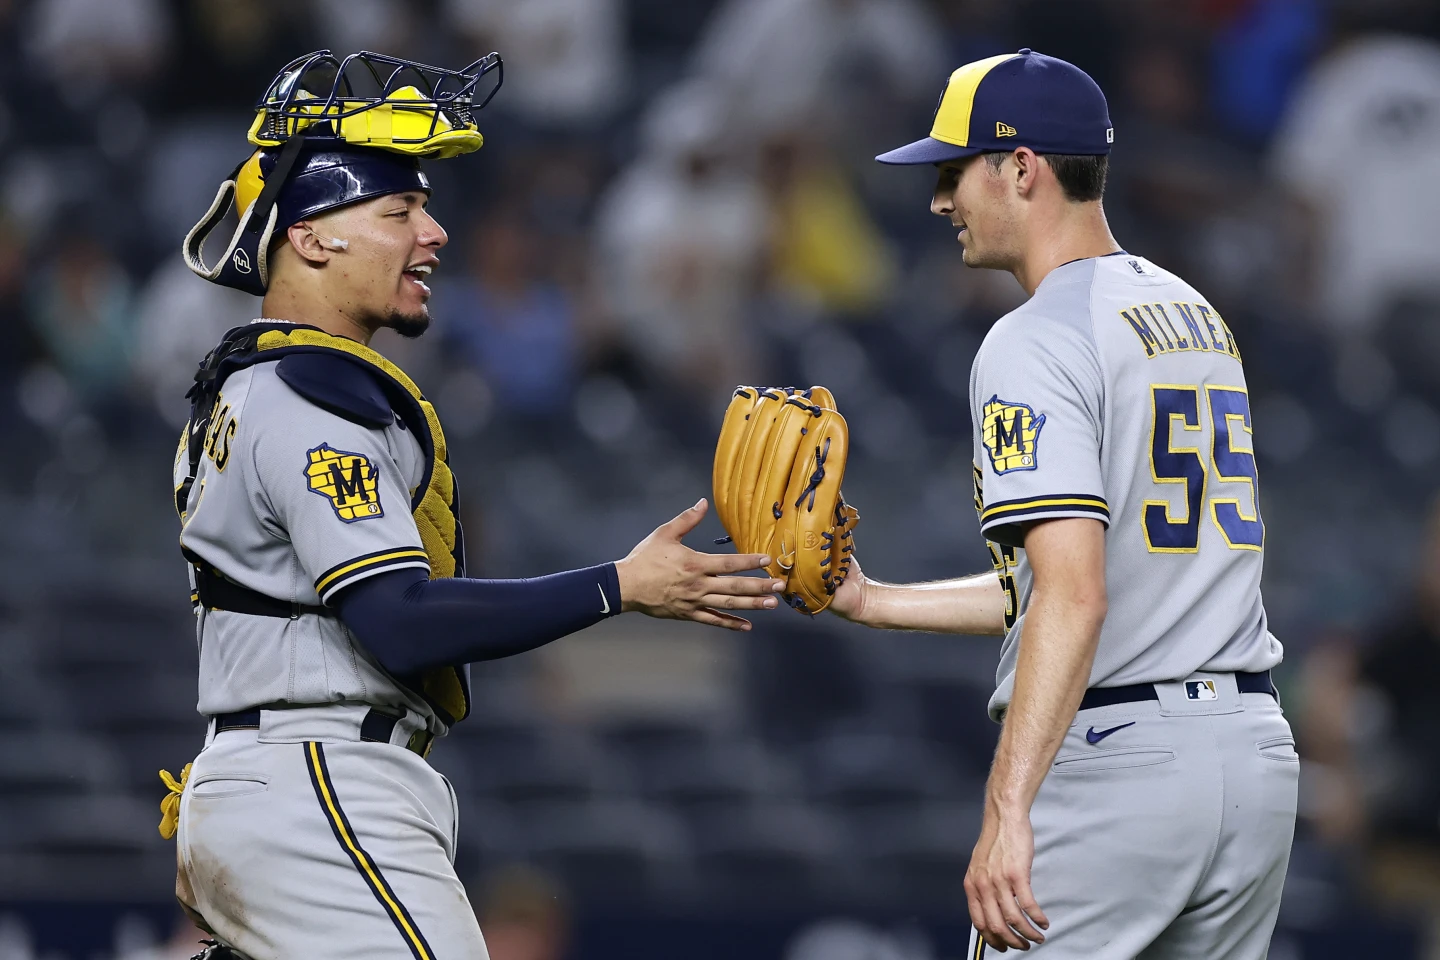 Loáisiga allowed go-ahead homer to Taylor in Yankees' 9-2 loss to Brewers  after honoring 1998 team